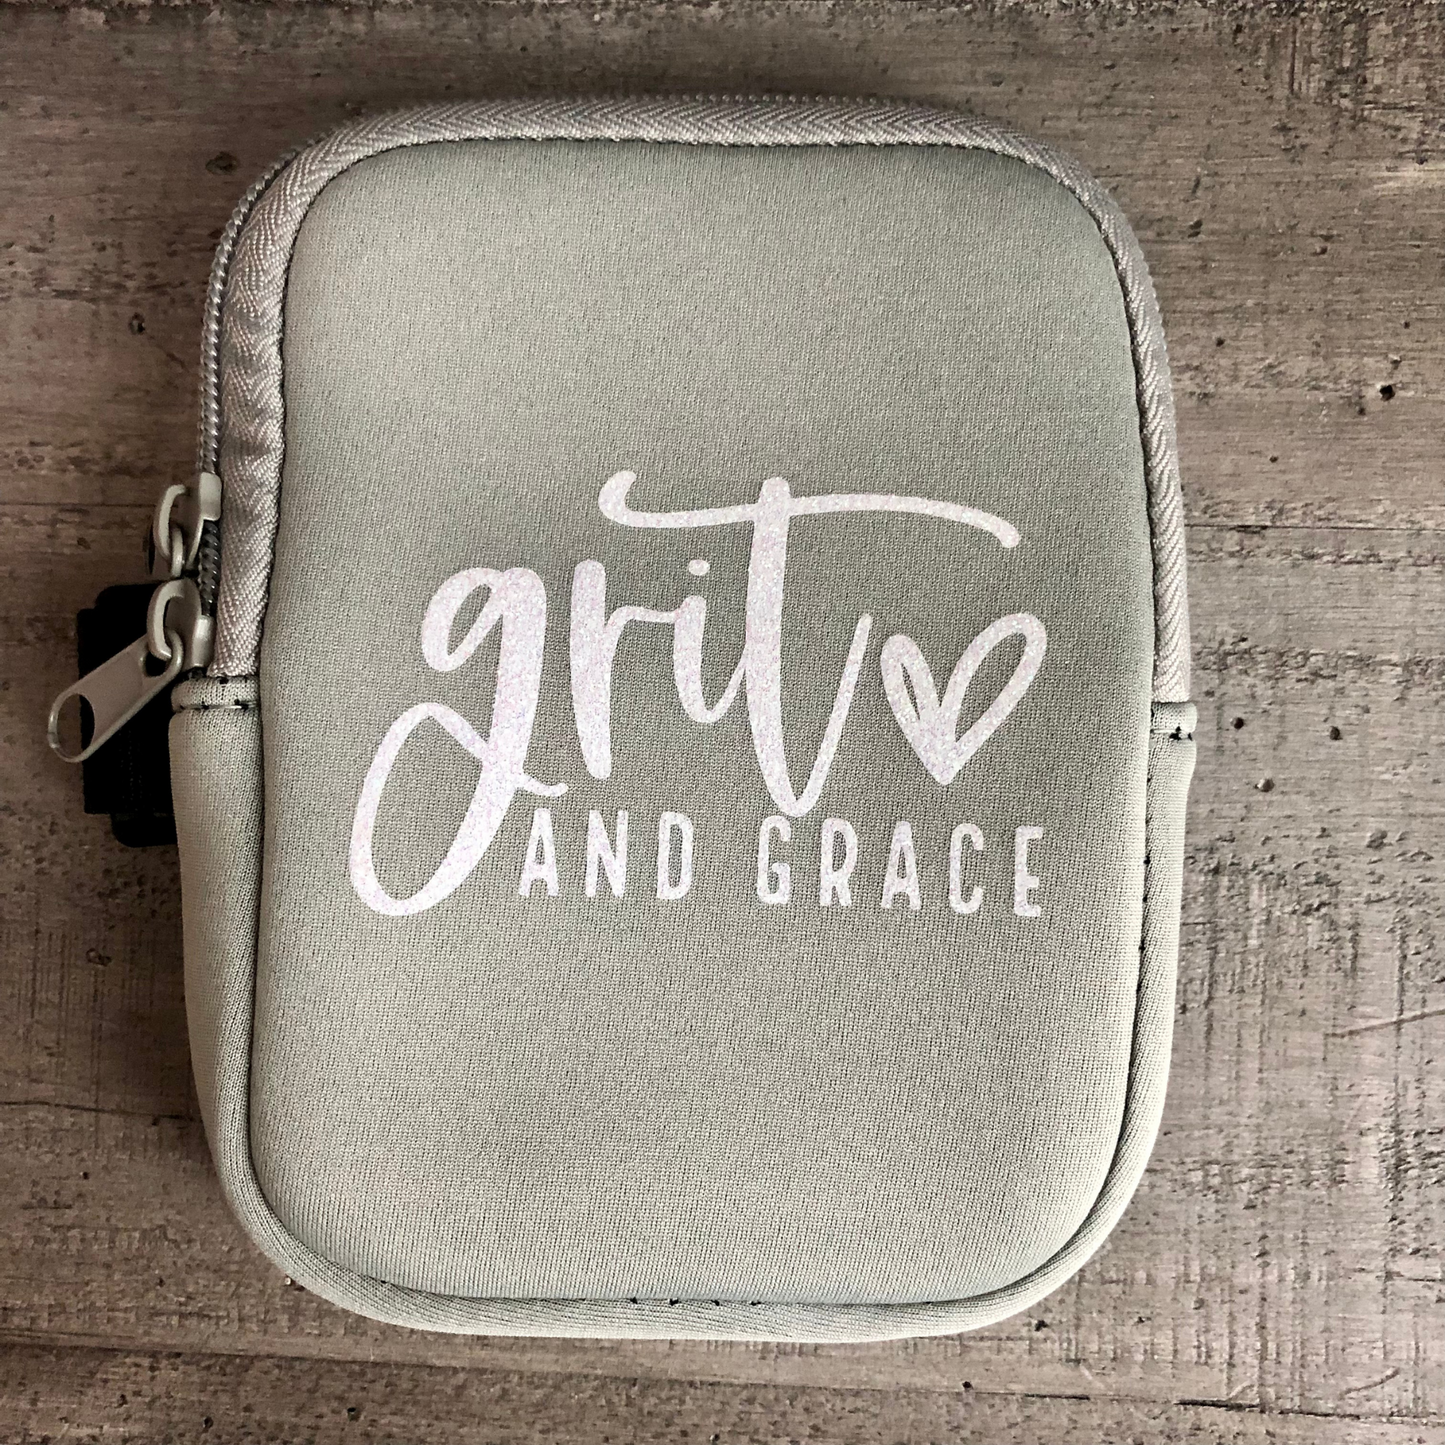 Tumbler Pouch - "Grit and Grace"